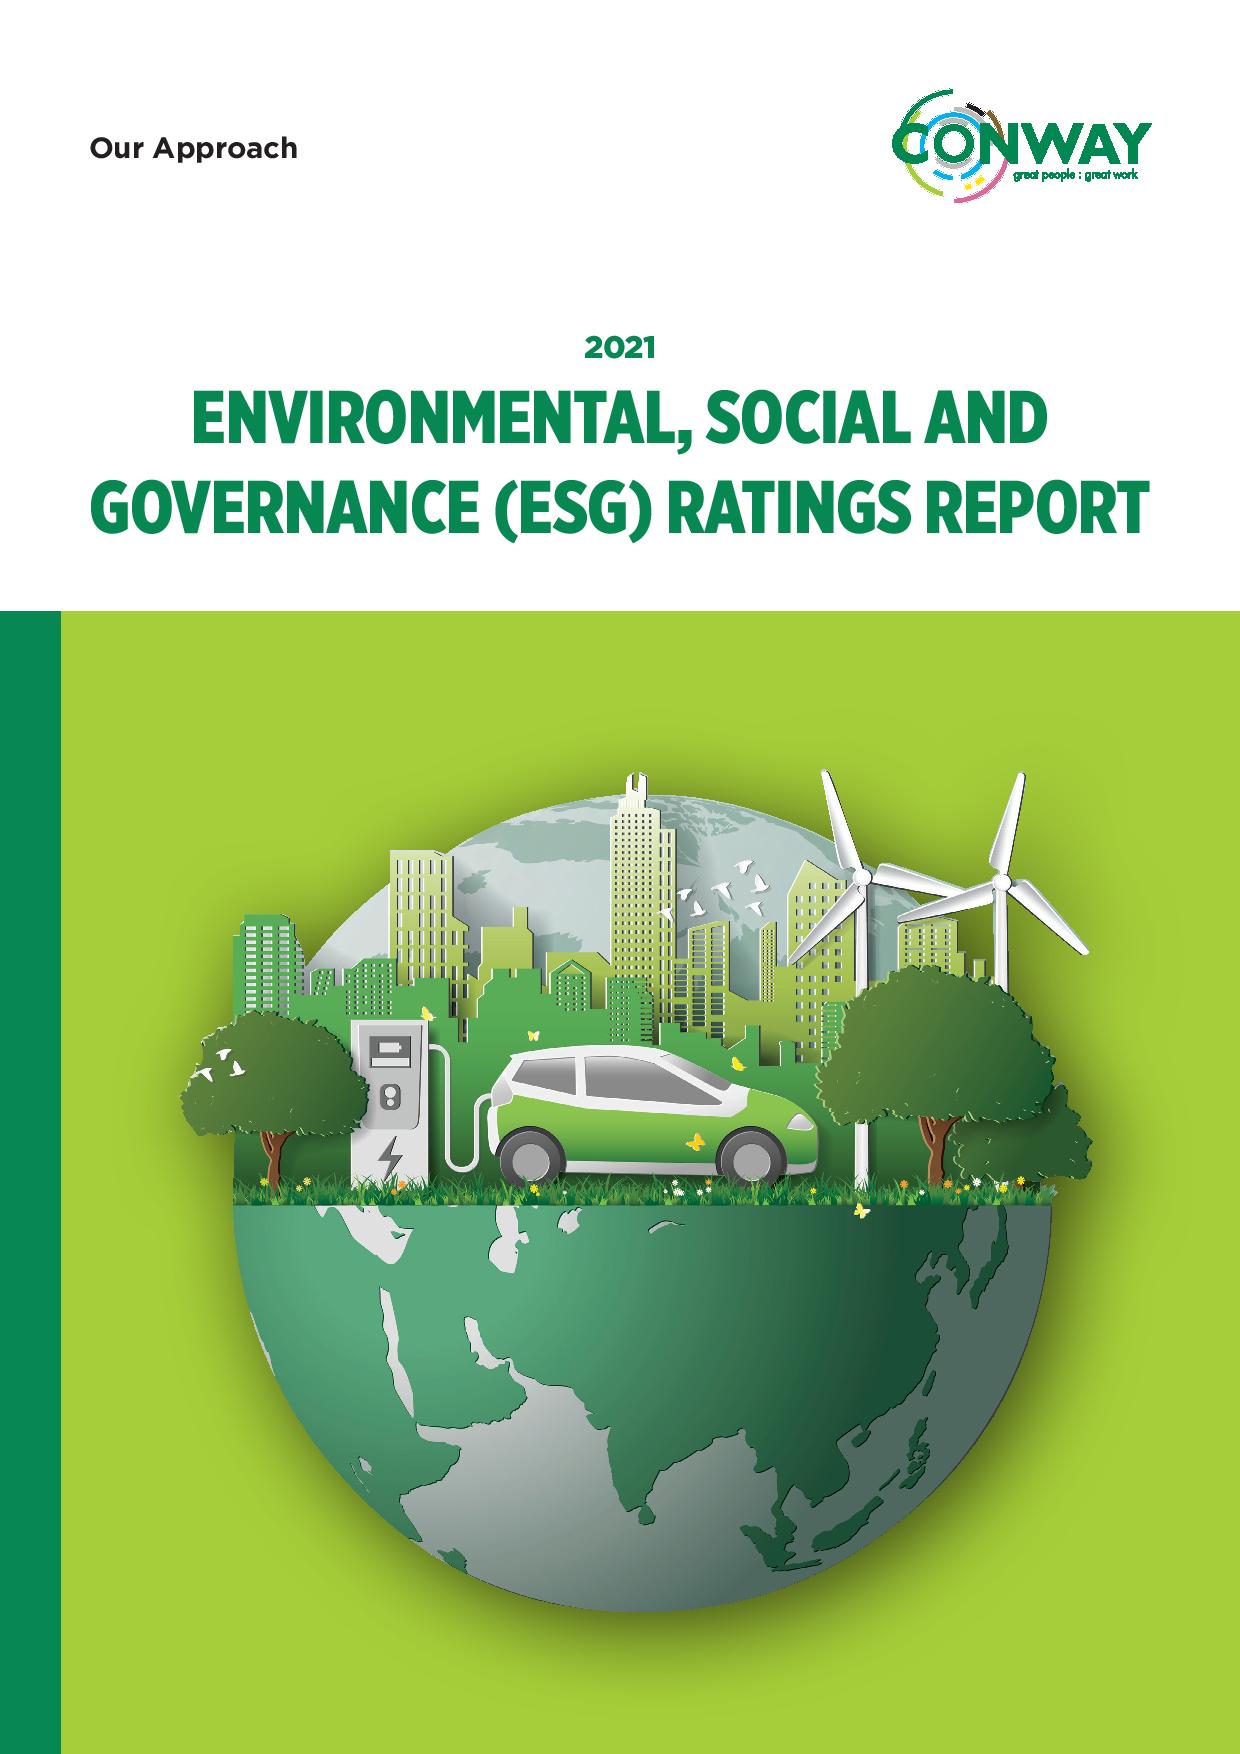 /files/library/images/about us/Library/FM Conway ESG Ratings Report 2021-page-001.jpg